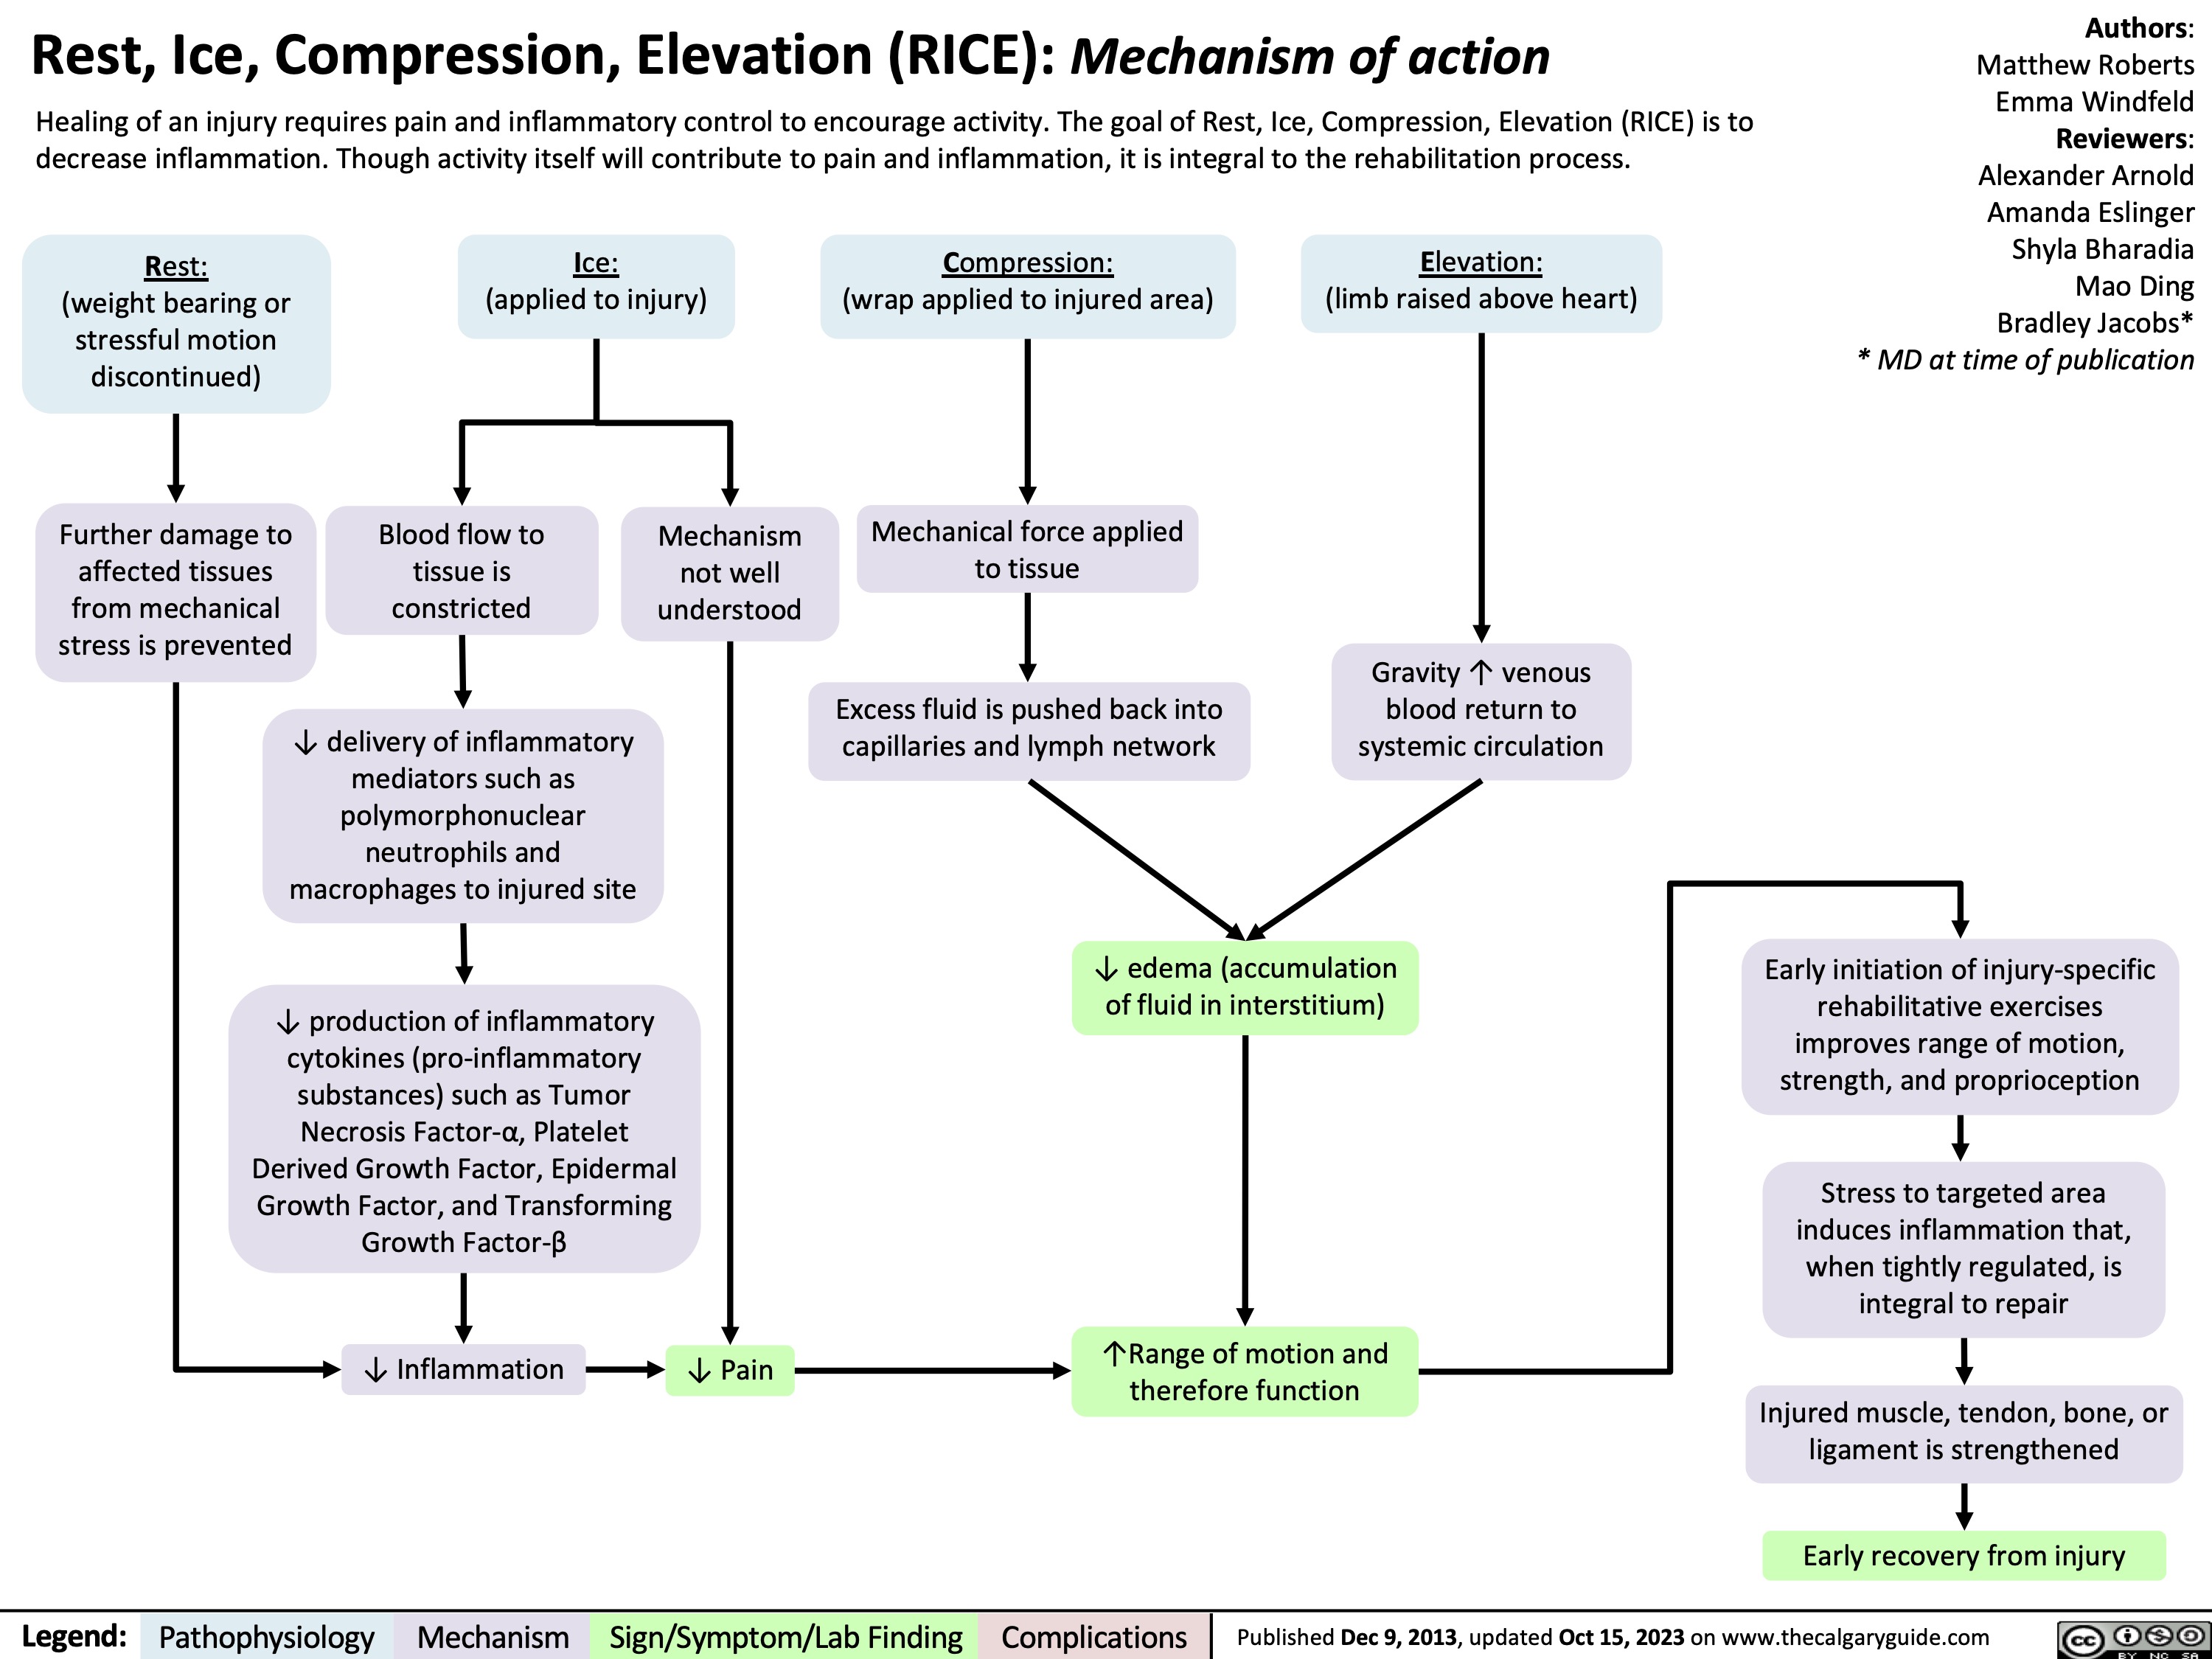 Rest, Ice, Compression, Elevation (RICE): Mechanism of action
Healing of an injury requires pain and inflammatory control to encourage activity. The goal of Rest, Ice, Compression, Elevation (RICE) is to
decrease inflammation. Though activity itself will contribute to pain and inflammation, it is integral to the rehabilitation process.
Authors: Matthew Roberts Emma Windfeld Reviewers: Alexander Arnold Amanda Eslinger Shyla Bharadia Mao Ding Bradley Jacobs* * MD at time of publication
    Rest: (weight bearing or stressful motion discontinued)
Further damage to affected tissues from mechanical stress is prevented
Ice: (applied to injury)
Compression:
(wrap applied to injured area)
Mechanical force applied to tissue
Excess fluid is pushed back into capillaries and lymph network
Elevation:
(limb raised above heart)
          Blood flow to tissue is constricted
Mechanism not well understood
      ↓ delivery of inflammatory mediators such as polymorphonuclear neutrophils and macrophages to injured site
↓ production of inflammatory cytokines (pro-inflammatory substances) such as Tumor Necrosis Factor-α, Platelet Derived Growth Factor, Epidermal Growth Factor, and Transforming Growth Factor-β
↓ Inflammation
Gravity ↑ venous blood return to systemic circulation
     ↓ edema (accumulation of fluid in interstitium)
Early initiation of injury-specific rehabilitative exercises improves range of motion, strength, and proprioception
Stress to targeted area induces inflammation that, when tightly regulated, is integral to repair
Injured muscle, tendon, bone, or ligament is strengthened
      ↓ Pain
↑Range of motion and therefore function
   Early recovery from injury
 Legend:
 Pathophysiology
Mechanism
Sign/Symptom/Lab Finding
 Complications
 Published Dec 9, 2013, updated Oct 15, 2023 on www.thecalgaryguide.com
   
Rest, Ice, Compression, Elevation (RICE): Mechanism of action
Healing of an injury requires pain and inflammatory control to encourage activity. The goal of Rest, Ice, Compression, Elevation (RICE) is to decrease
inflammation. Though activity itself will contribute to pain and inflammation, it is integral to the rehabilitation process.
Authors: Matthew Roberts Emma Windfeld Reviewers: Alexander Arnold Amanda Eslinger Shyla Bharadia Bradley Jacobs* * MD at time of publication
     Rest: (weight bearing or stressful motion discontinued)
Further damage to affected tissues from mechanical stress is prevented
Ice: (applied to injury)
Compression: (wrap applied to injured area)
Mechanical force applied to tissue
Excess fluid is pushed back into capillaries and lymph network
Elevation: (limb raised above heart)
Gravity ↑ venous blood return to systemic circulation
      Blood flow to tissue is constricted
↓ delivery of inflammatory mediators such as polymorphonuclear neutrophils and macrophages to injured site
Mechanism not well understood
              ↓ production of inflammatory cytokines (pro- inflammatory substances) such as Tumor Necorsis Factor-α, Platelet Derived Growth Factor, Epidermal Growth Factor, and Transforming Growth Factor-β
↓ Inflammation
↓ Pain
↓ edema (accumulation of fluid in interstitium)
↑Range of motion and therefore function
Early initiation of injury- specific rehabilitative exercises improves range of motion, strength, and proprioception
Stress to targeted area induces inflammation that, when tightly regulated, is integral to repair
Injured muscle, tendon, bone, or ligament is strengthened
Early recovery from injury
              Legend: Published MONTH, DAY, YEAR on www.thecalgaryguide.com
Pathophysiology
Mechanism
Sign/Symptom/Lab Finding
Complications
  
RICE: Mechanism of action
Authors: Matthew Roberts Emma Windfeld Reviewers: Alexander Arnold Amanda Eslinger Shyla Bharadia Bradley Jacobs* * MD at time of publication
 Rest
(weight bearing or stressful motion discontinued)
Ice
(applied to injury)
Compression
(wrap applied to injured area)
Elevation
(limb raised above heart)
Constricts blood flow to tissue
Mechanism not well understood
Mechanical force applied to tissue
↓ Delivery of polymorphonuclear neutrophils and macrophages to injured site
Excess fluid pushed back into capillaries and lymph network
Gravity ↑ venous blood return to systemic circulation
Prevents further damage to affected tissues from mechanical stress
↓ Production of inflammatory cytokines
↓ Edema (accumulation of fluid in interstitium)
↓ Inflammation
↓ Pain
                 ↑Range of motion and therefore function
   Early initiation of injury-specific rehabilitative exercises to improve range of motion, strength, and proprioception
Stress to targeted area induces inflammation that, when tightly regulated, is integral to repair
Injured muscle, tendon, bone, or ligament is strengthened
Early recovery from injury
            Legend: Published MONTH, DAY, YEAR on www.thecalgaryguide.com
Pathophysiology
Mechanism
Sign/Symptom/Lab Finding
Complications
  